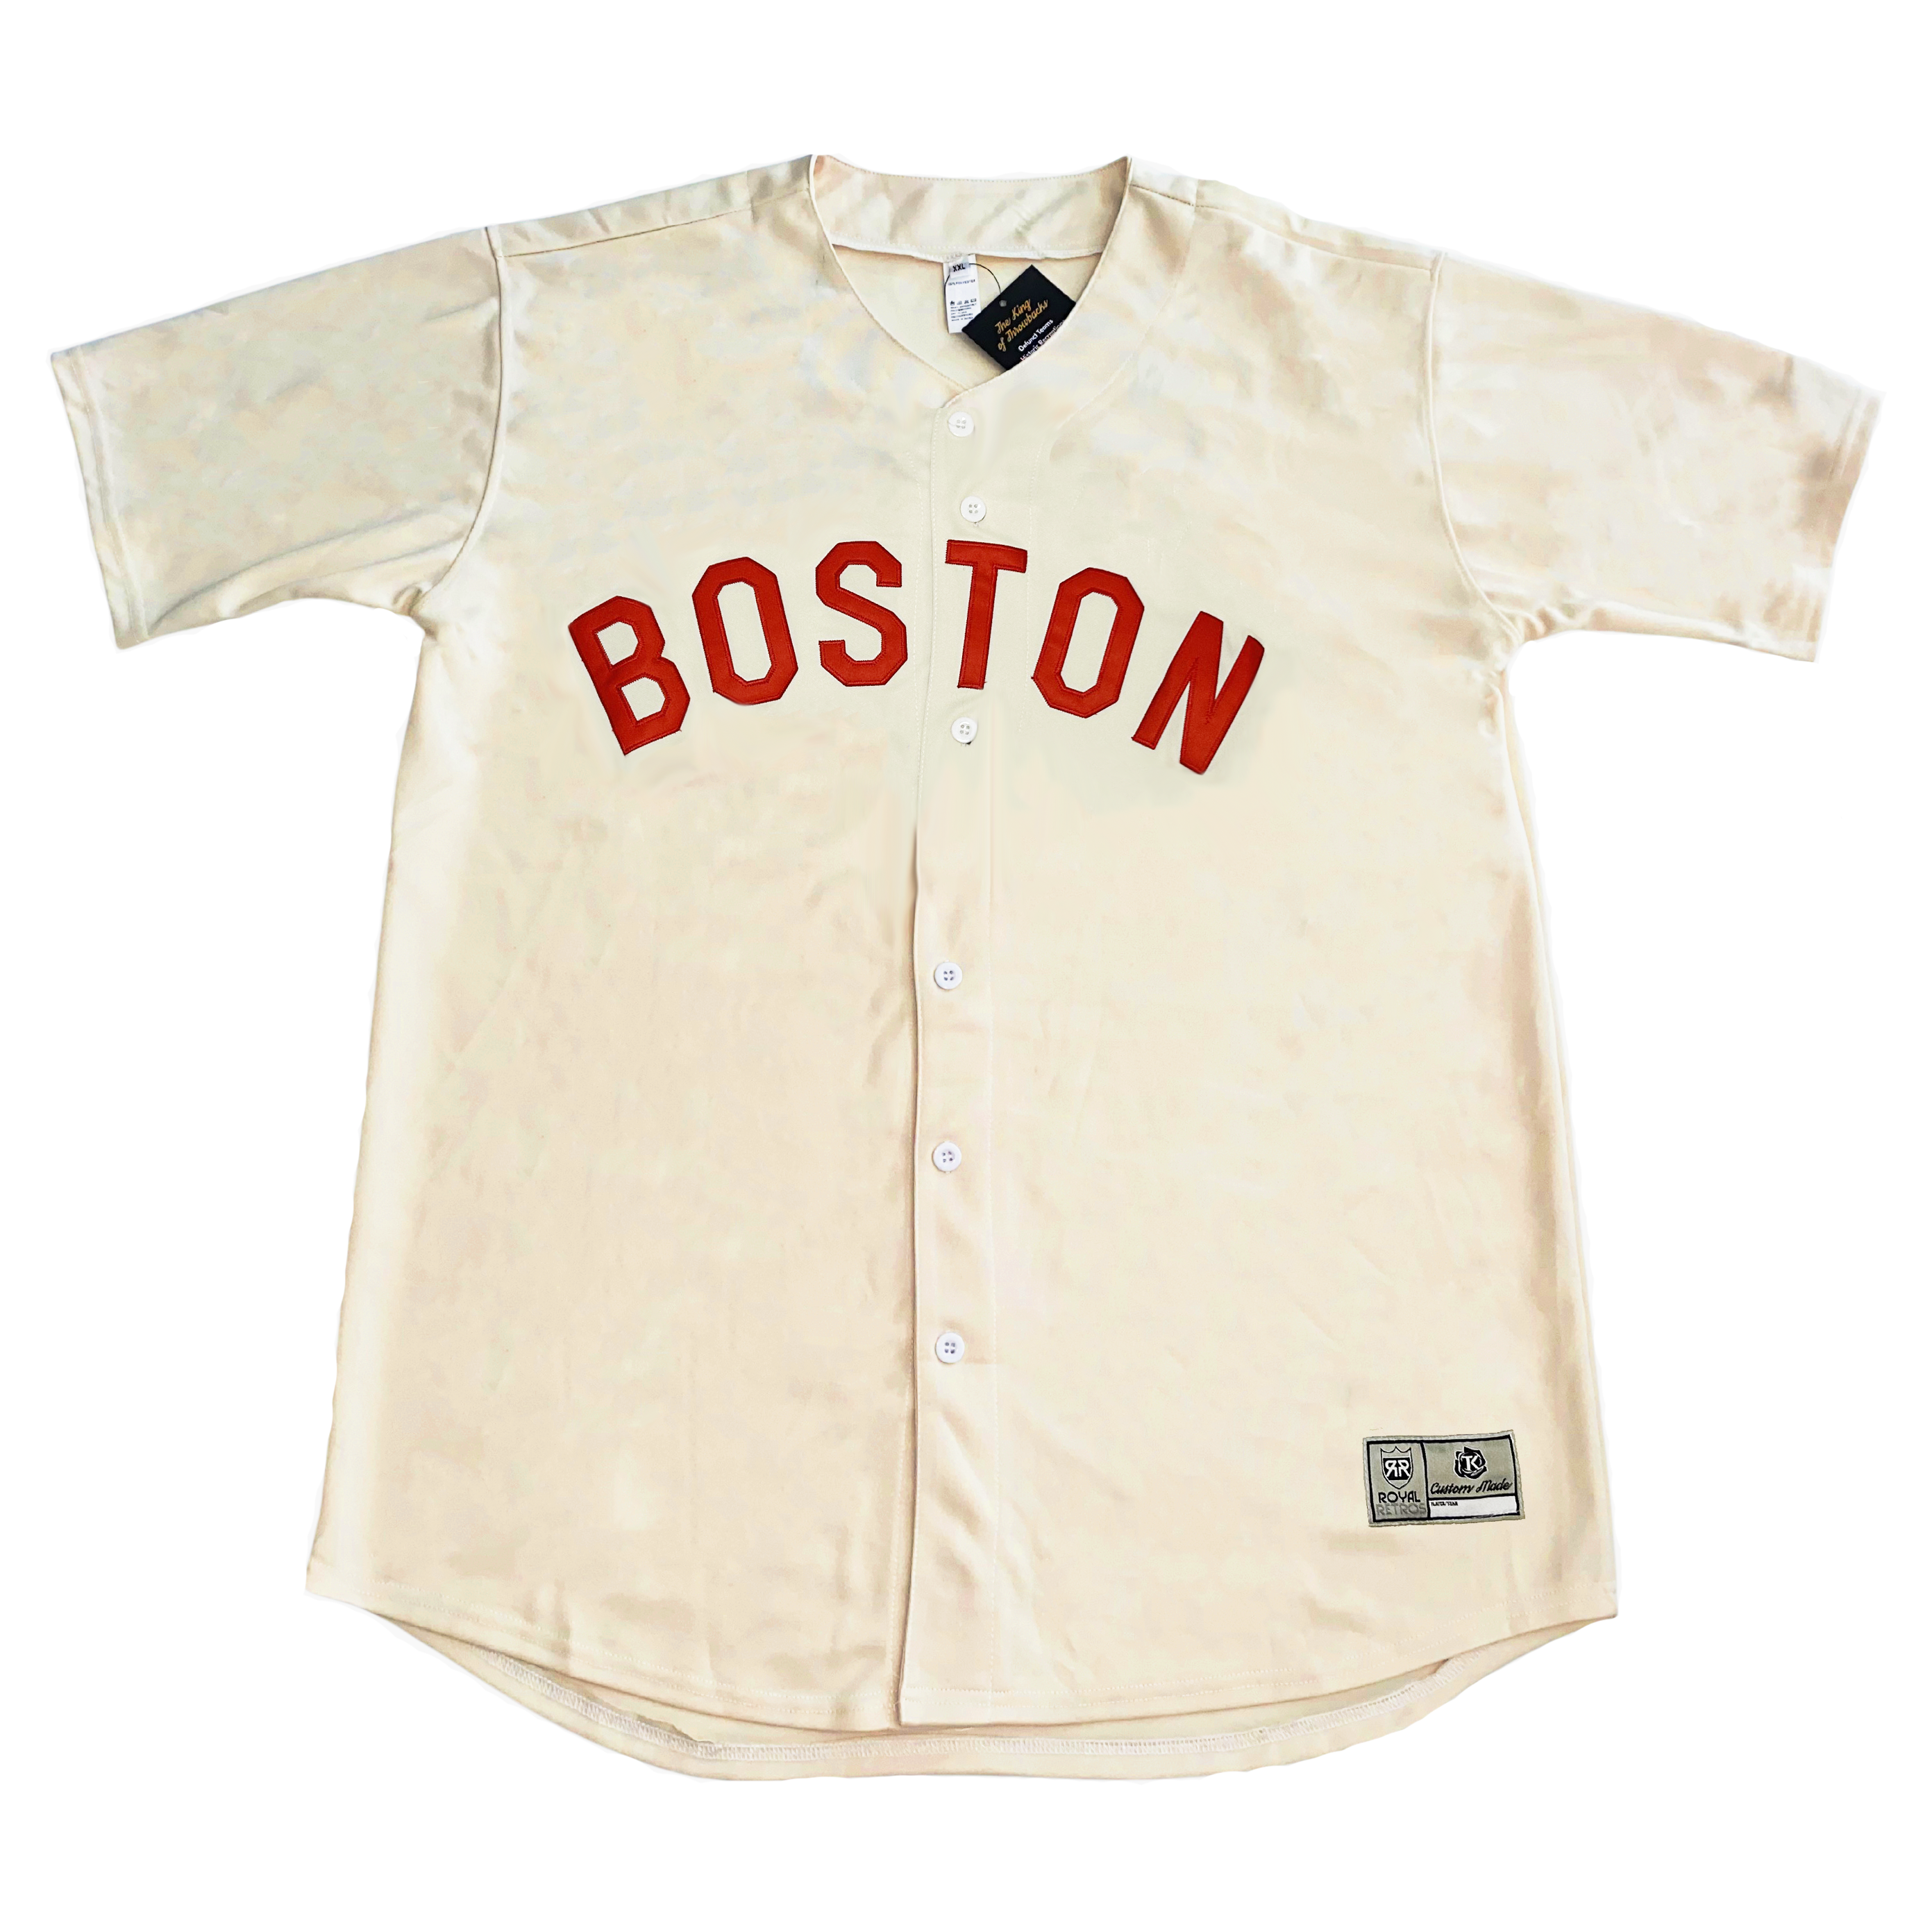 Boston Bees Authentic Jersey Editorial Stock Photo - Image of sports,  carved: 98306613